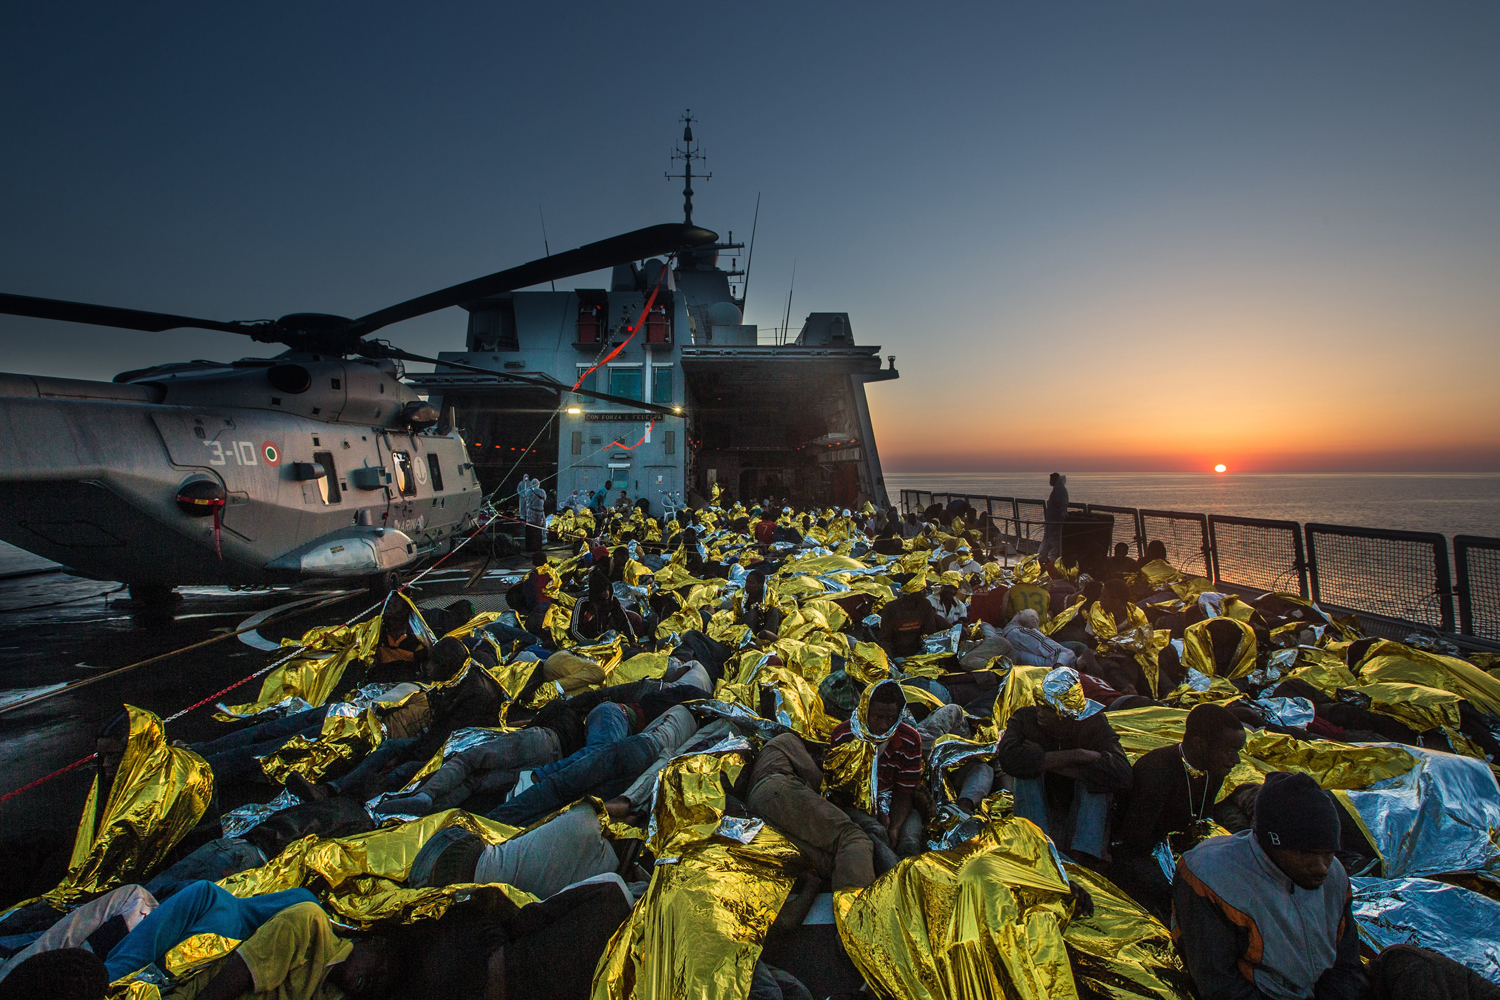 African asylum seekers rescued off boats and taken aboard an Italy navy ship, June 8, 2014.